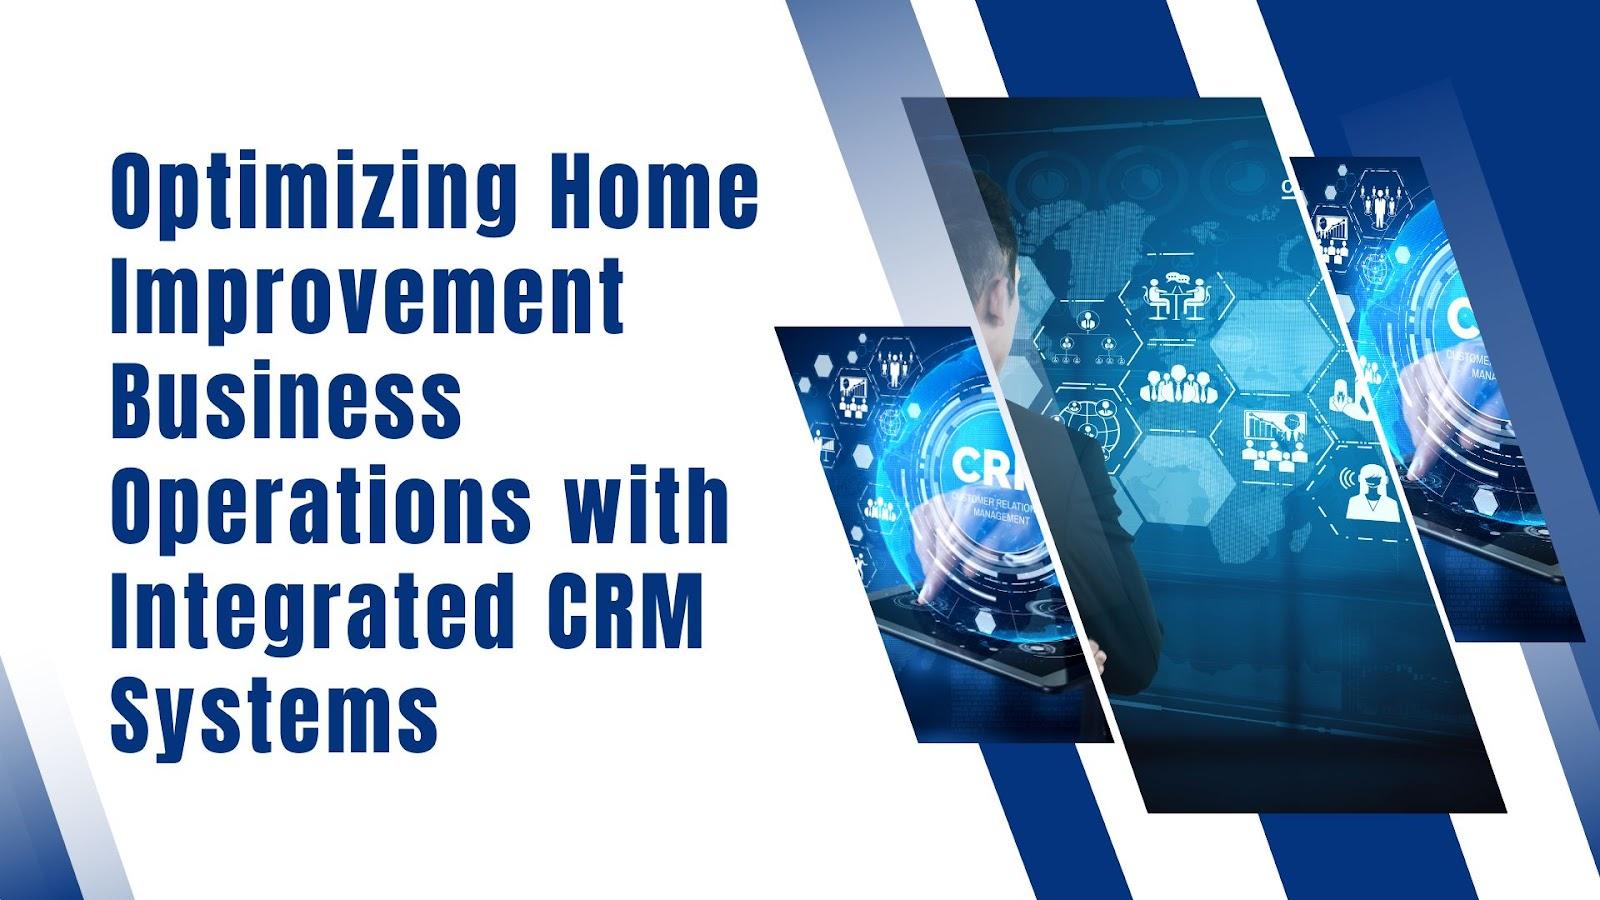 Integrated CRM Systems